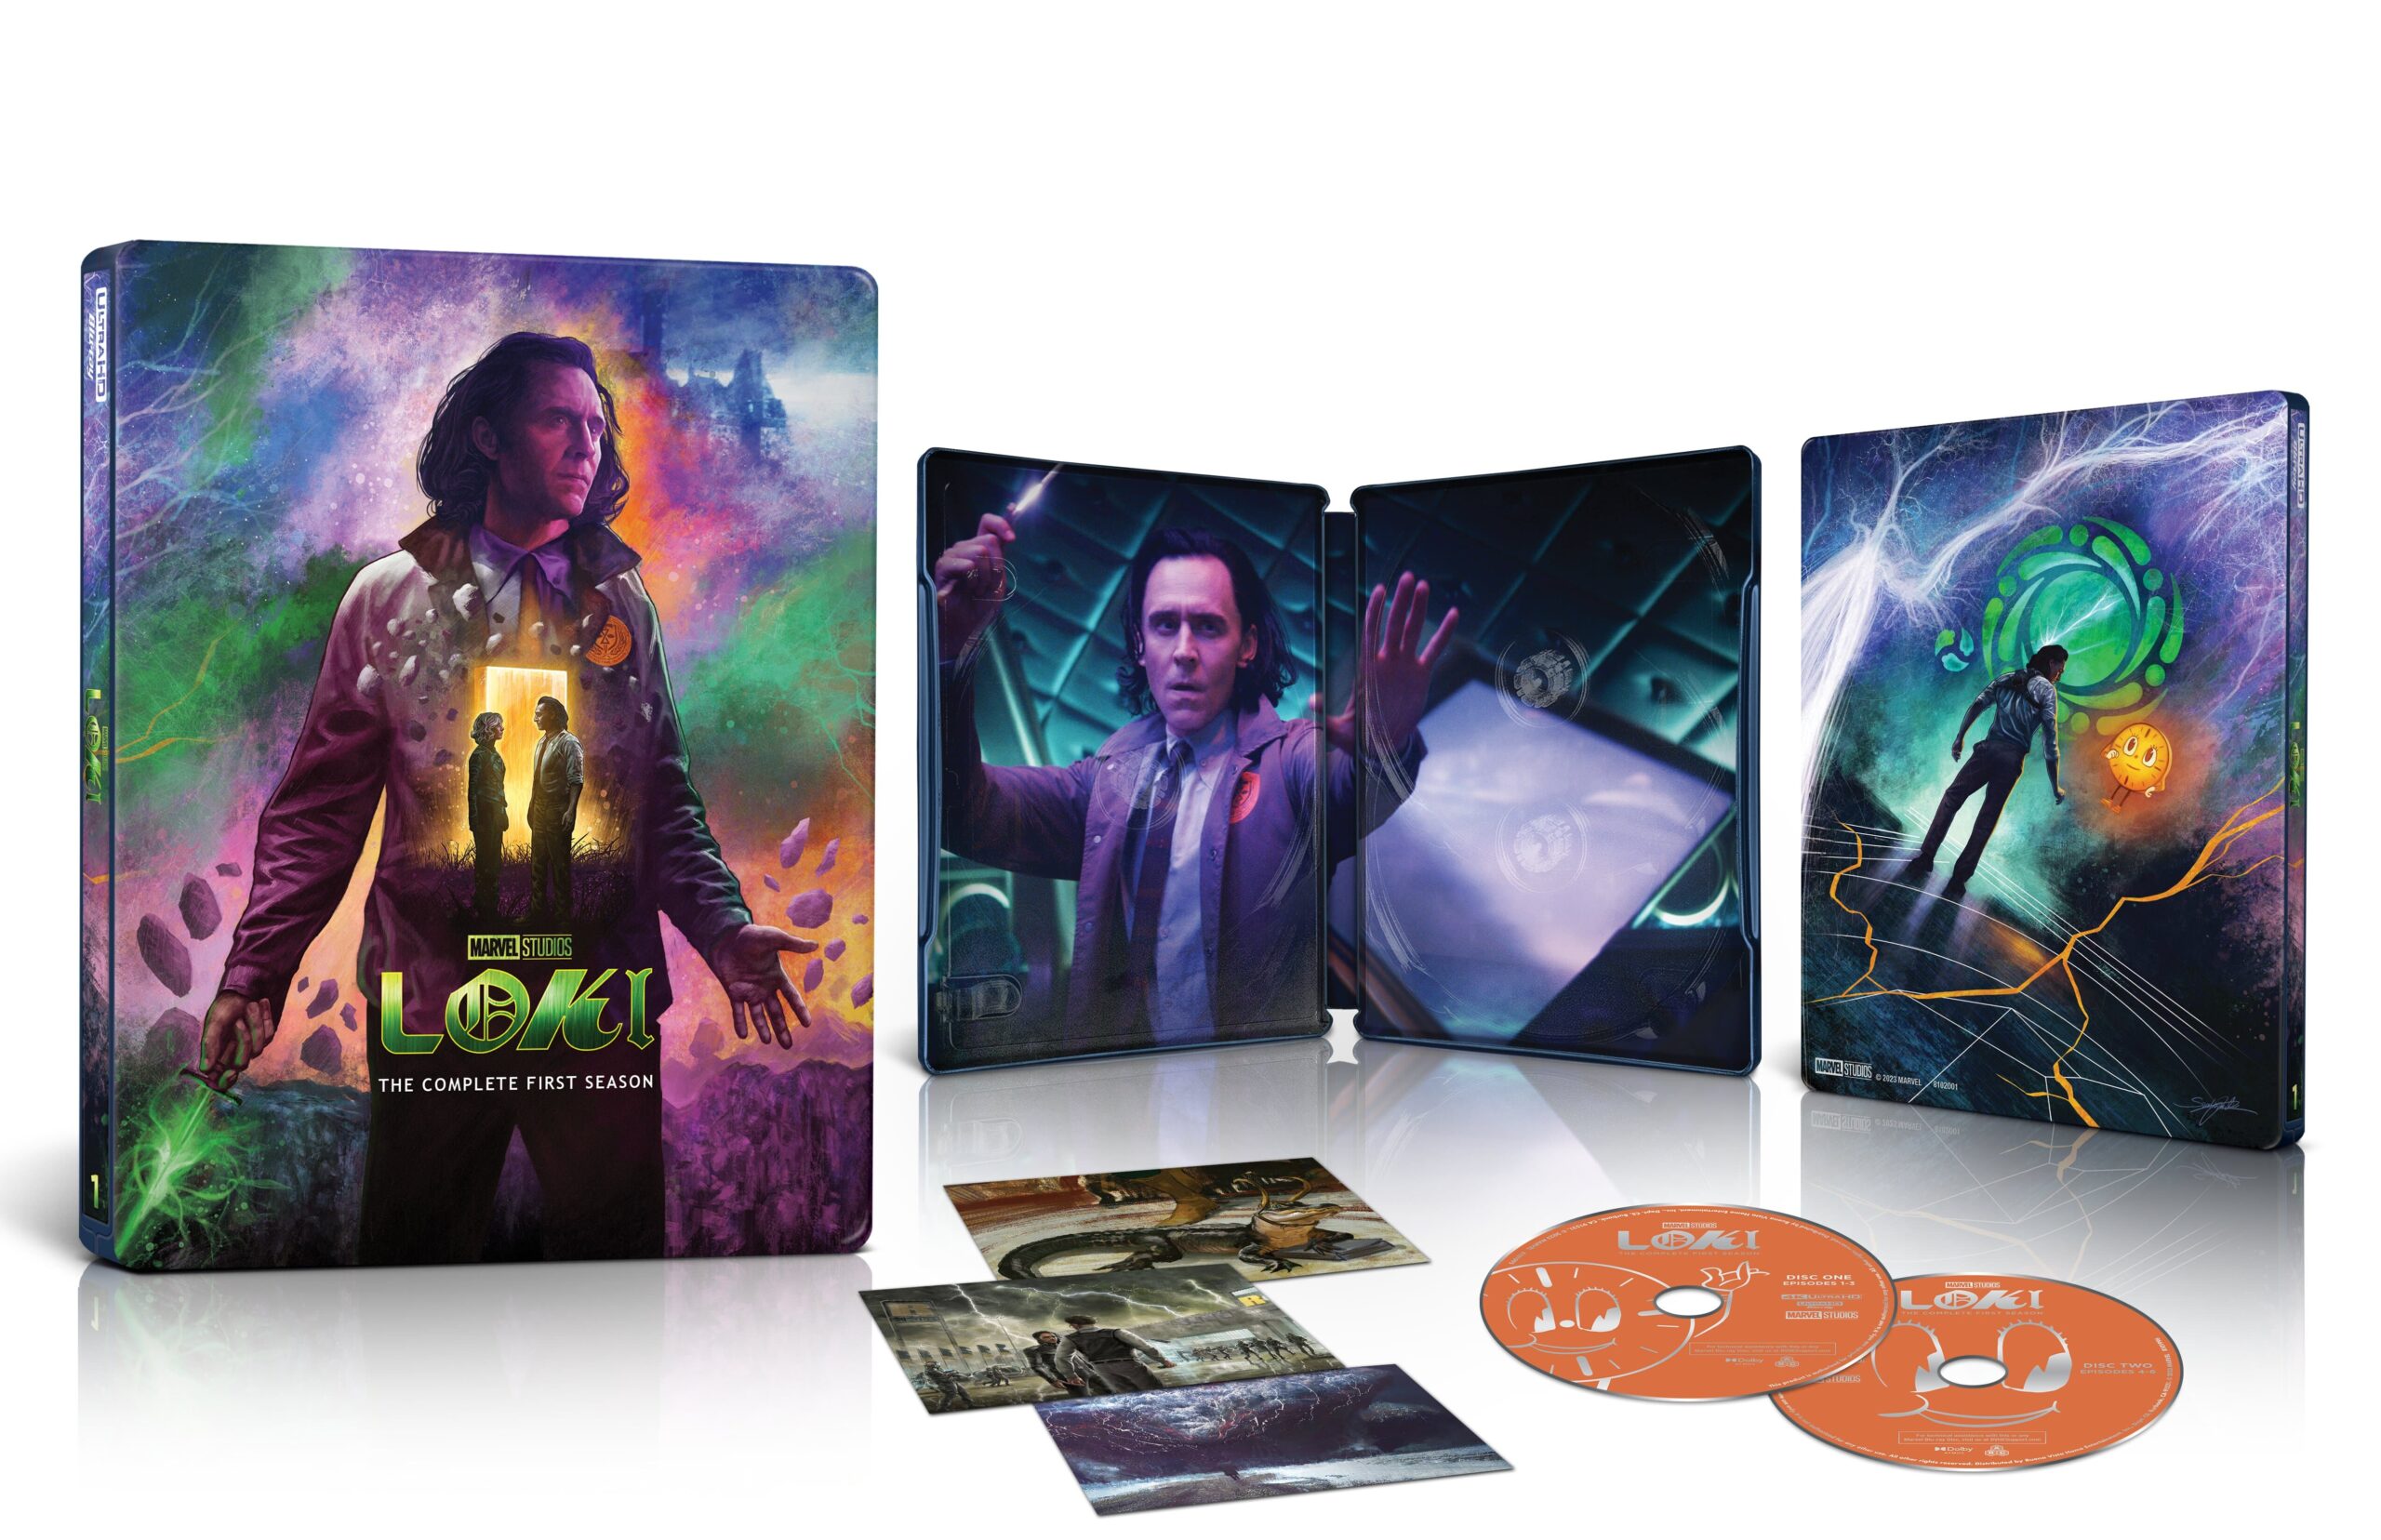 Disney Discs Aren’t Dead: Disney+ Originals Loki, WandaVision, and The Mandalorian Coming Out On Blu-Ray & 4K This Year